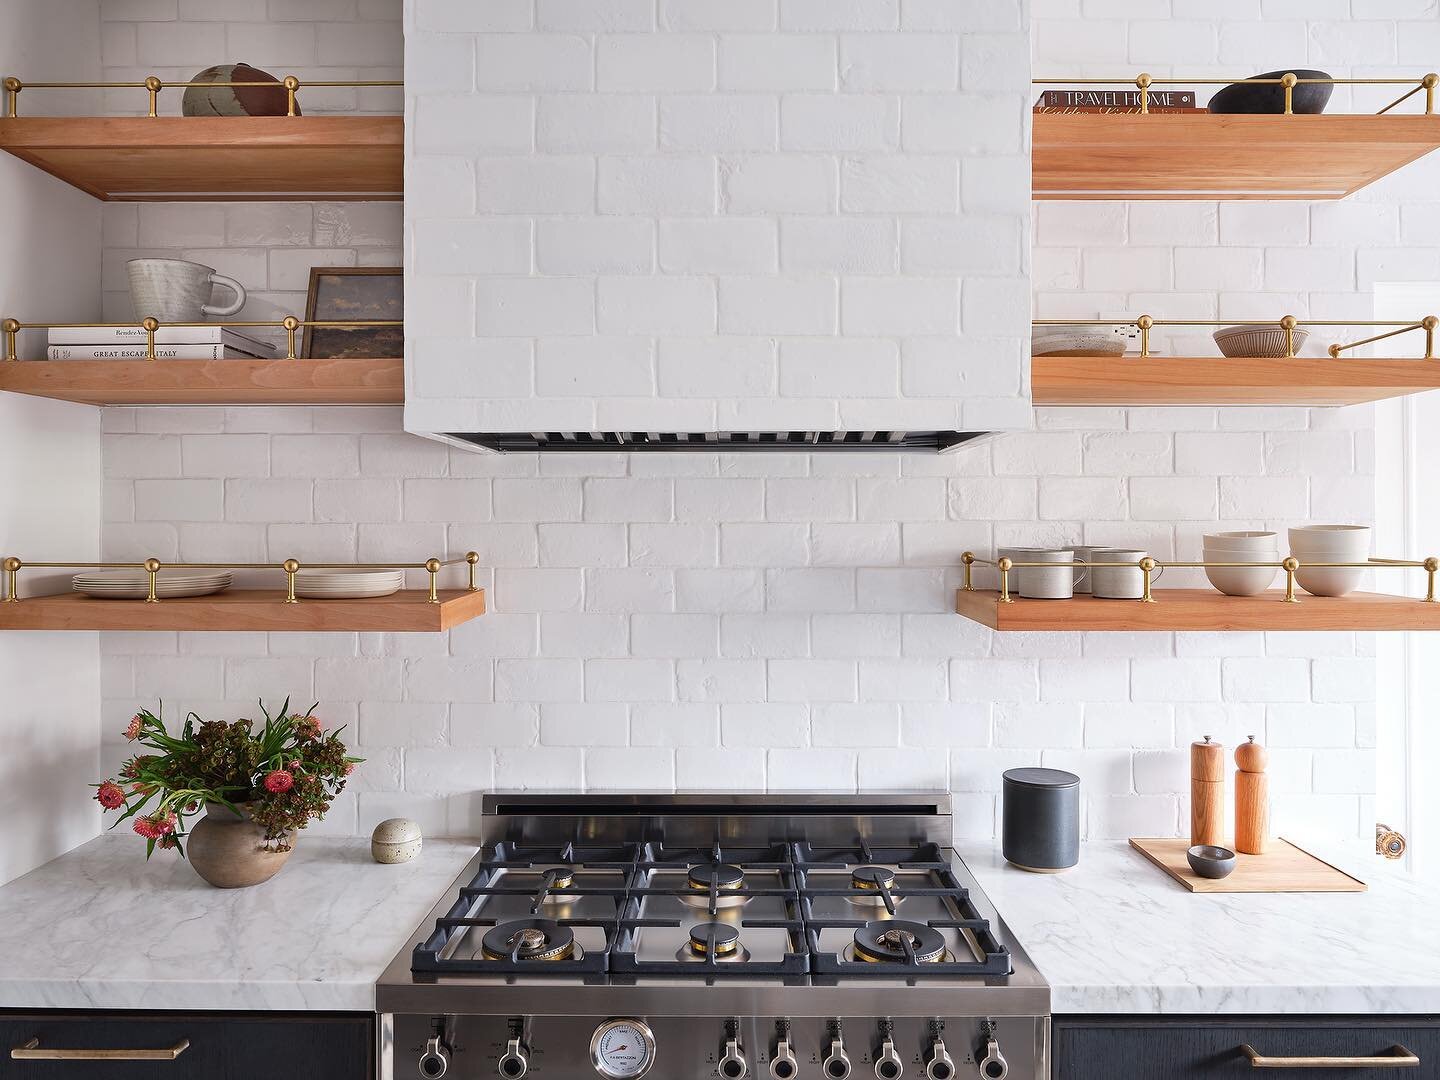 The flawless symmetry of our custom sycamore floating shelves perfectly complements the artisanal touch of handmade tiles &ndash; it&rsquo;s design harmony. And that burner? To use the most appropriate phrase possible - 😙🤌 chef&rsquo;s kiss! 

Alth